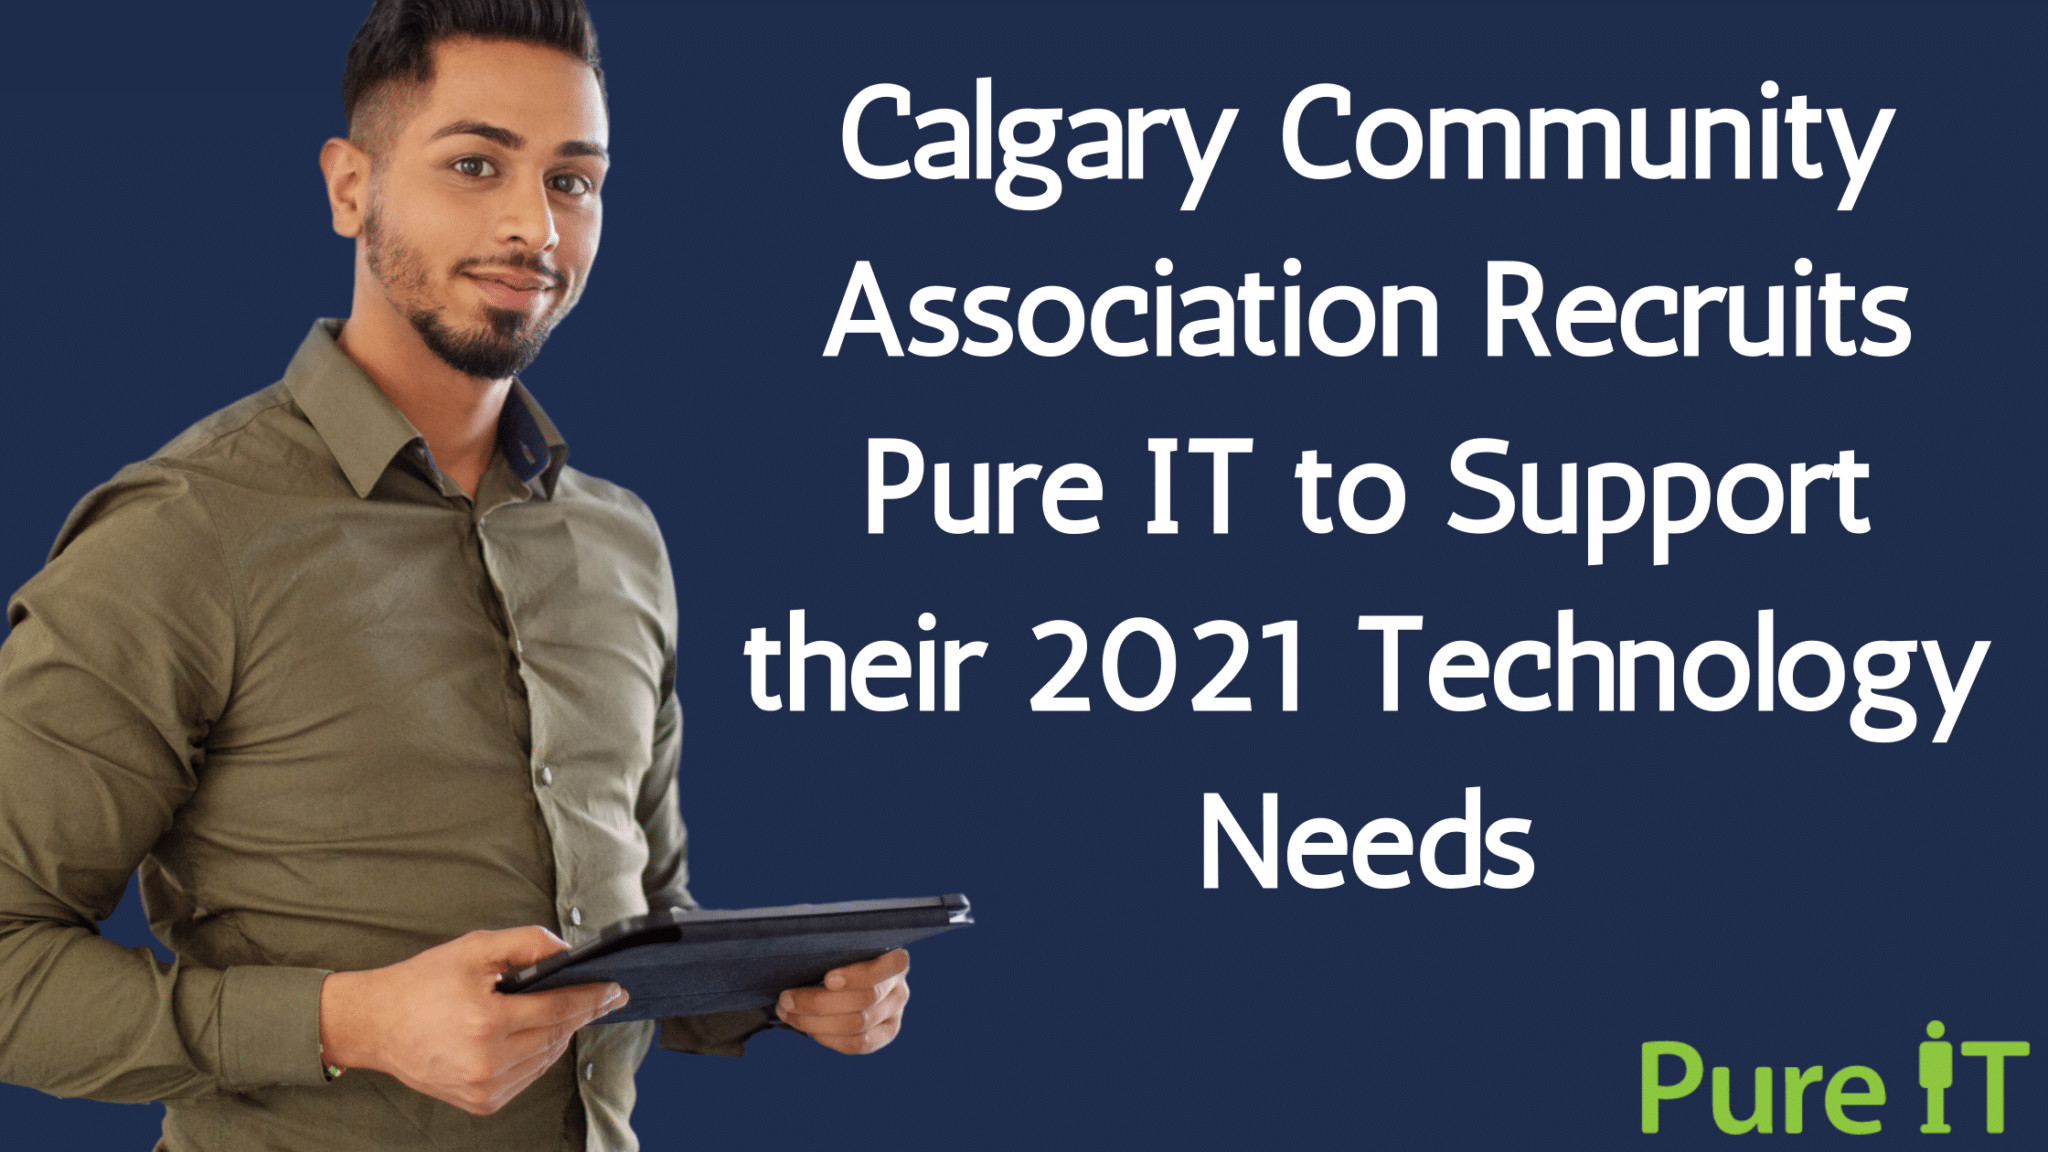 Calgary Community Association Recruits Pure IT to Support their 2021 Technology Needs